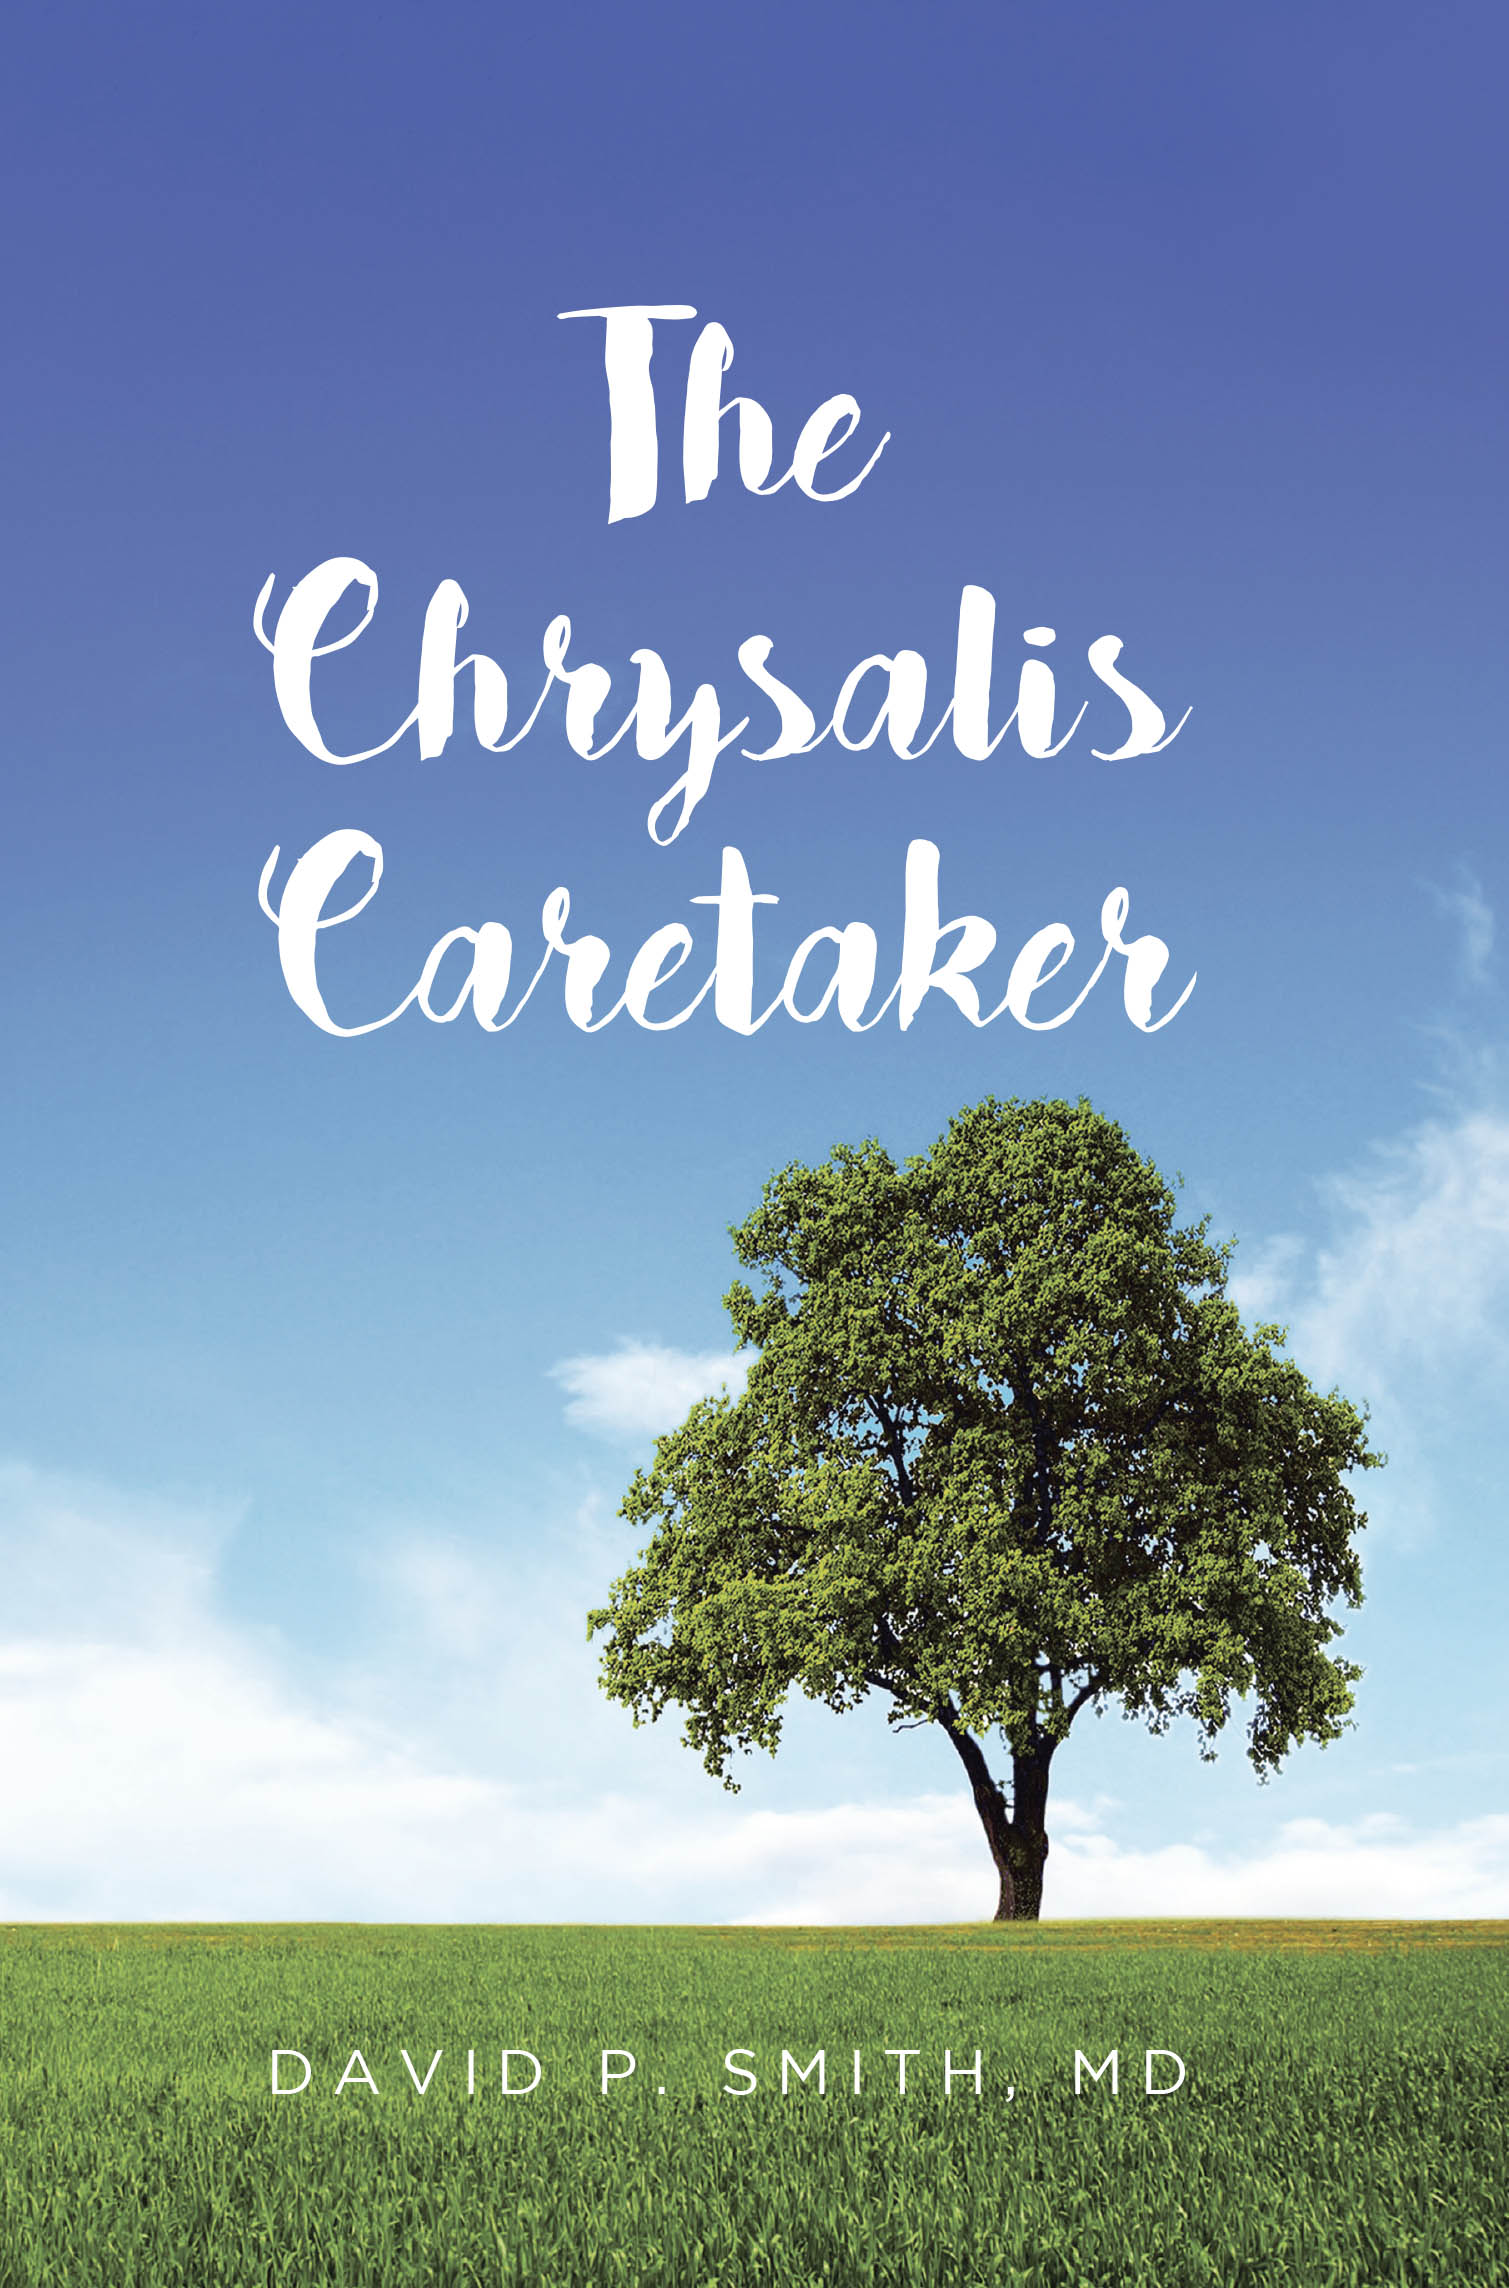 Author David P. Smith, MD’s New Book, “The Chrysalis Caretaker,” is a Compelling Novel That Follows One Young Woman’s Path to Overcome Her Past Traumas